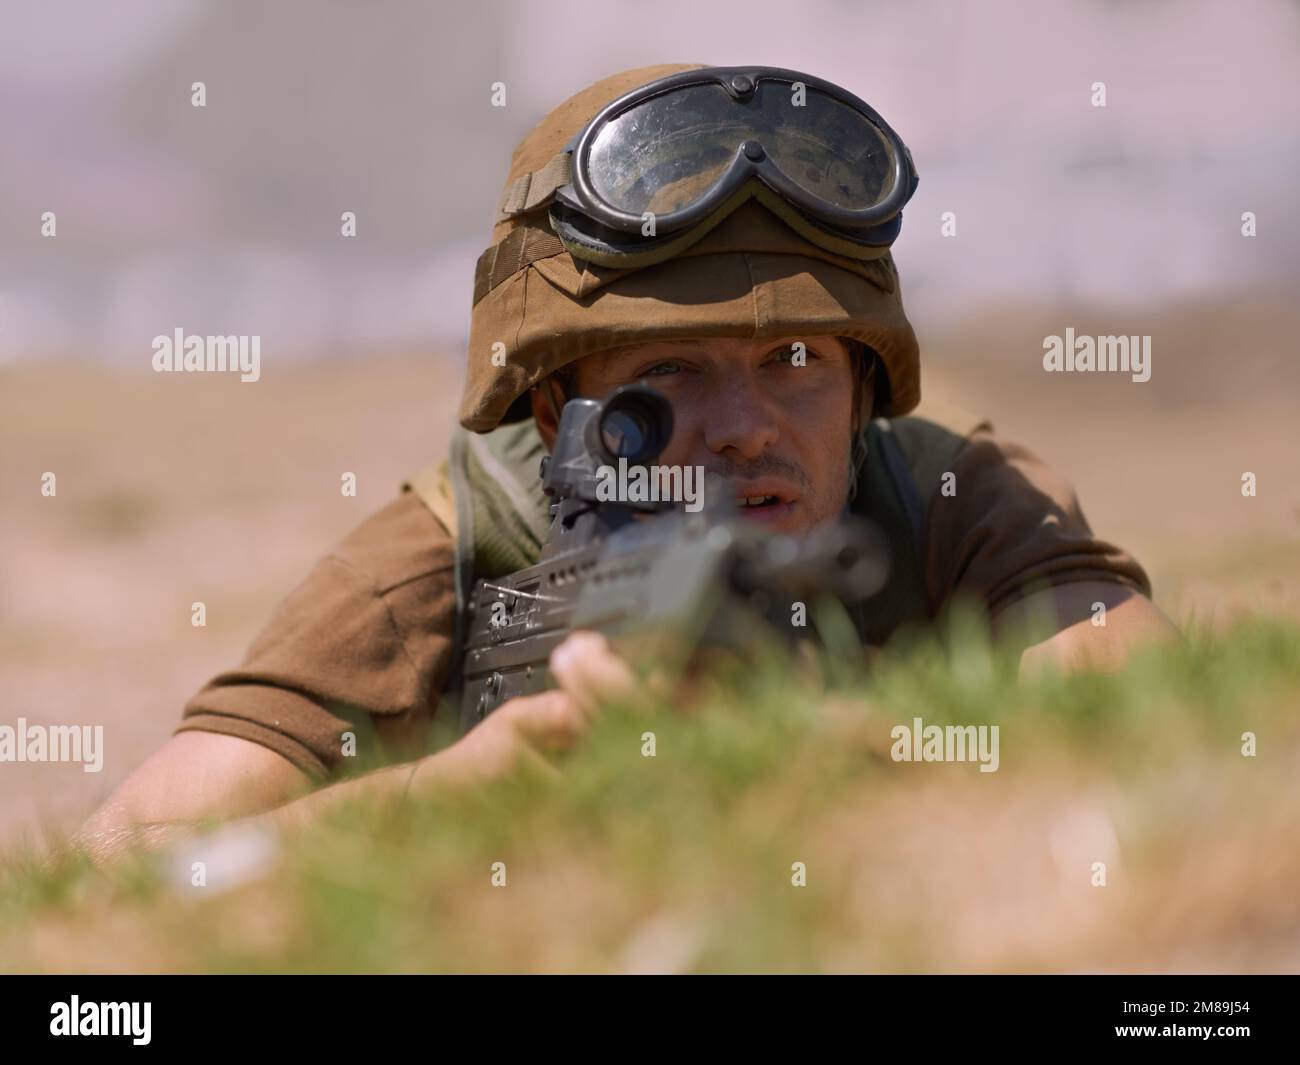 Trained to aim. A young soldier aiming with his rifle while lying on the ground. Stock Photo